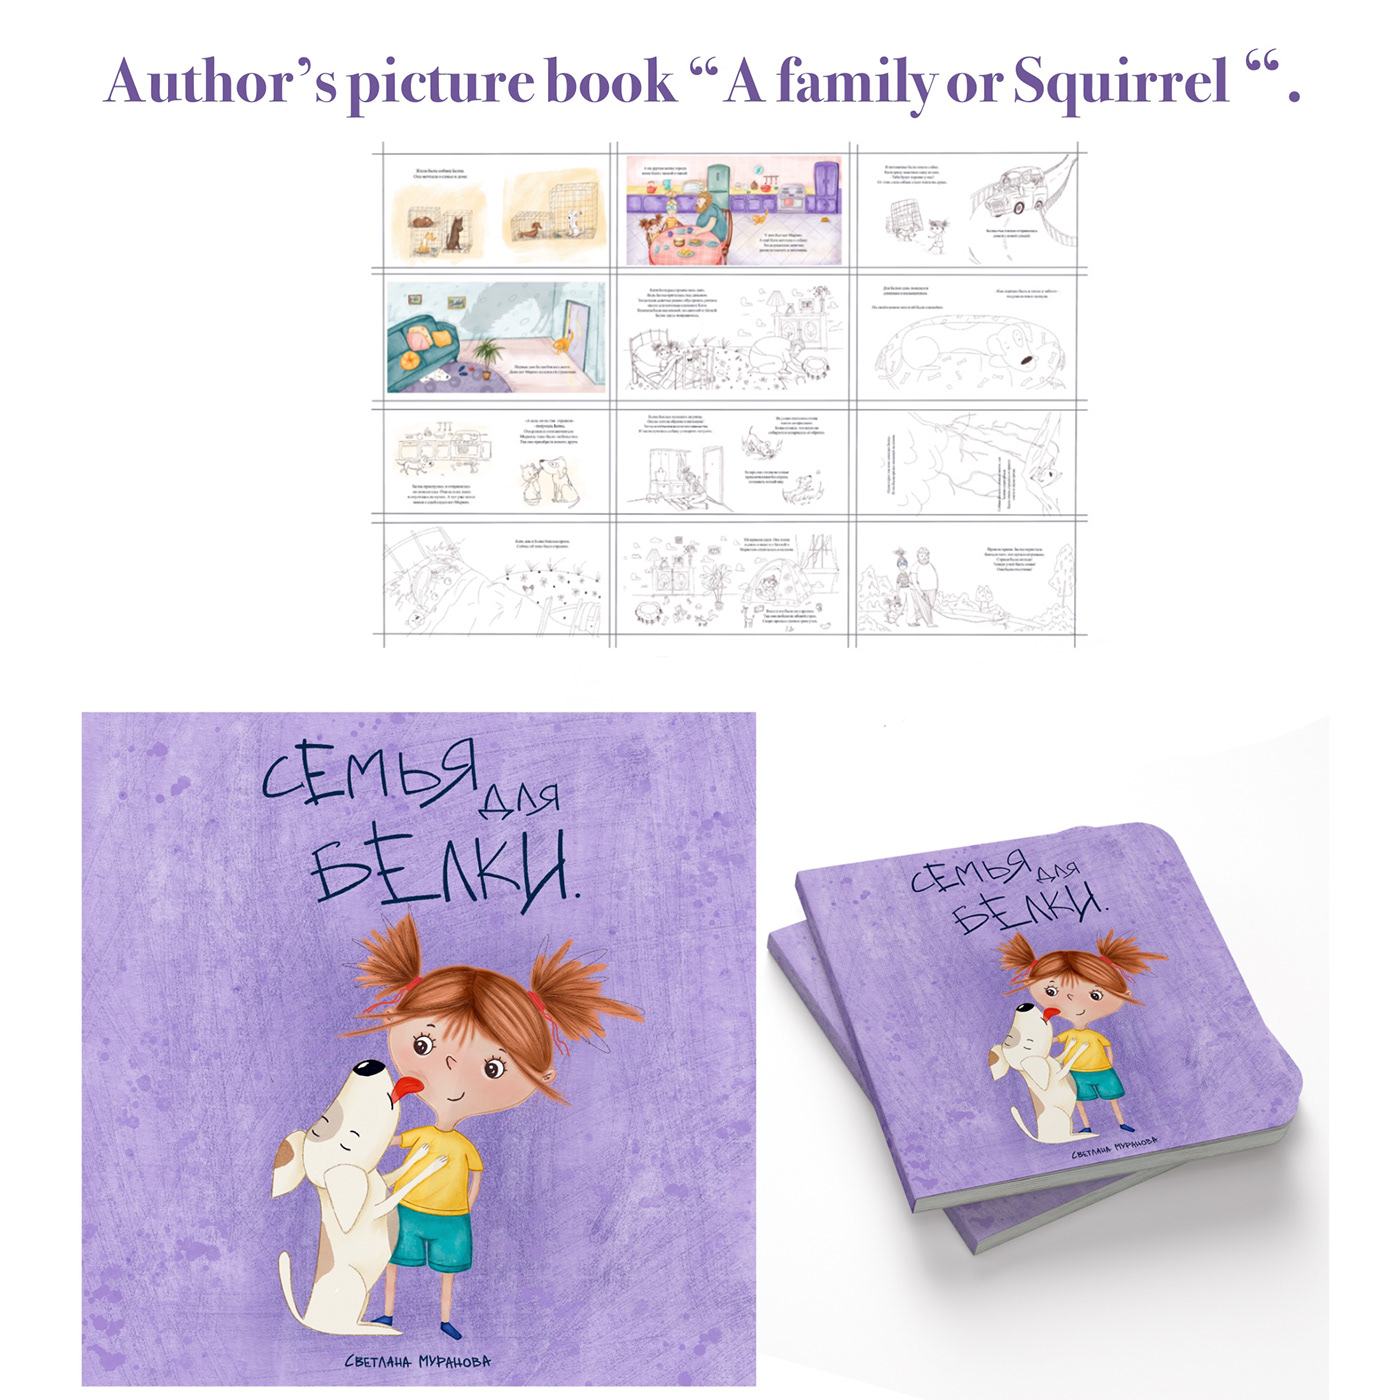 Storyboard of the author's picture book "Family for a Squirrel"